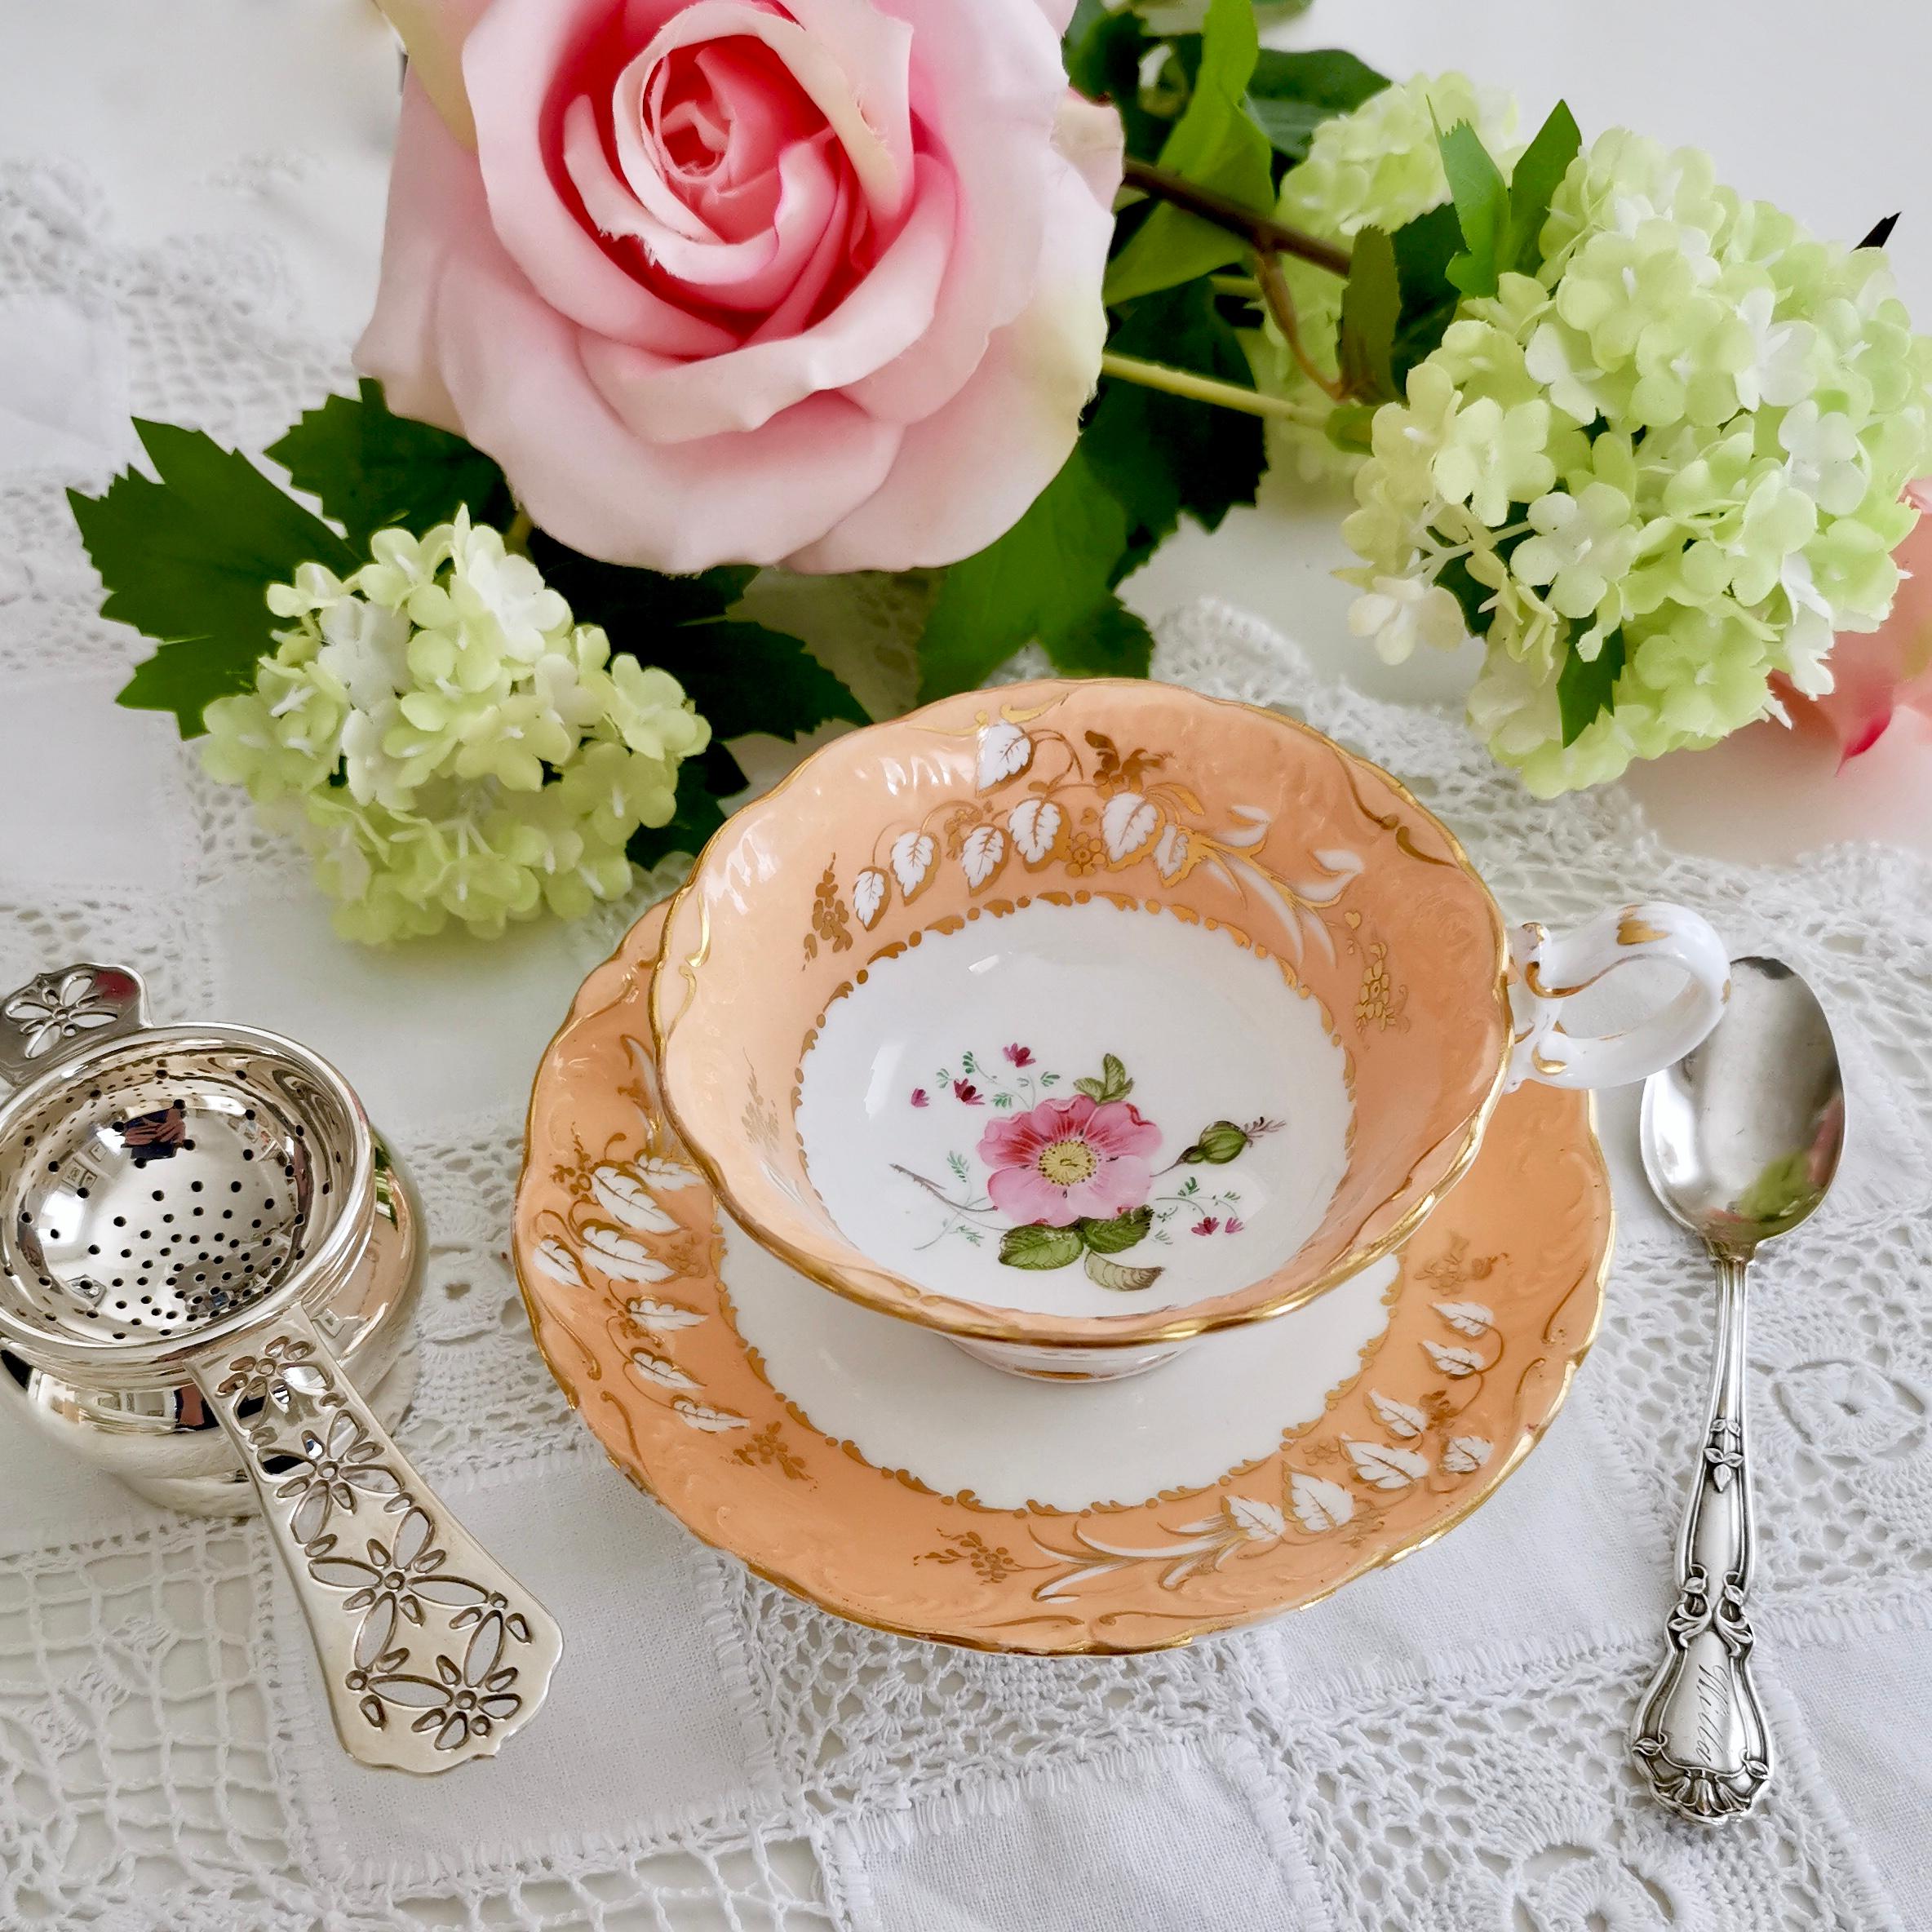 This is a teacup and saucer made by Coalport in or shortly after 1839. It was made in the famous 